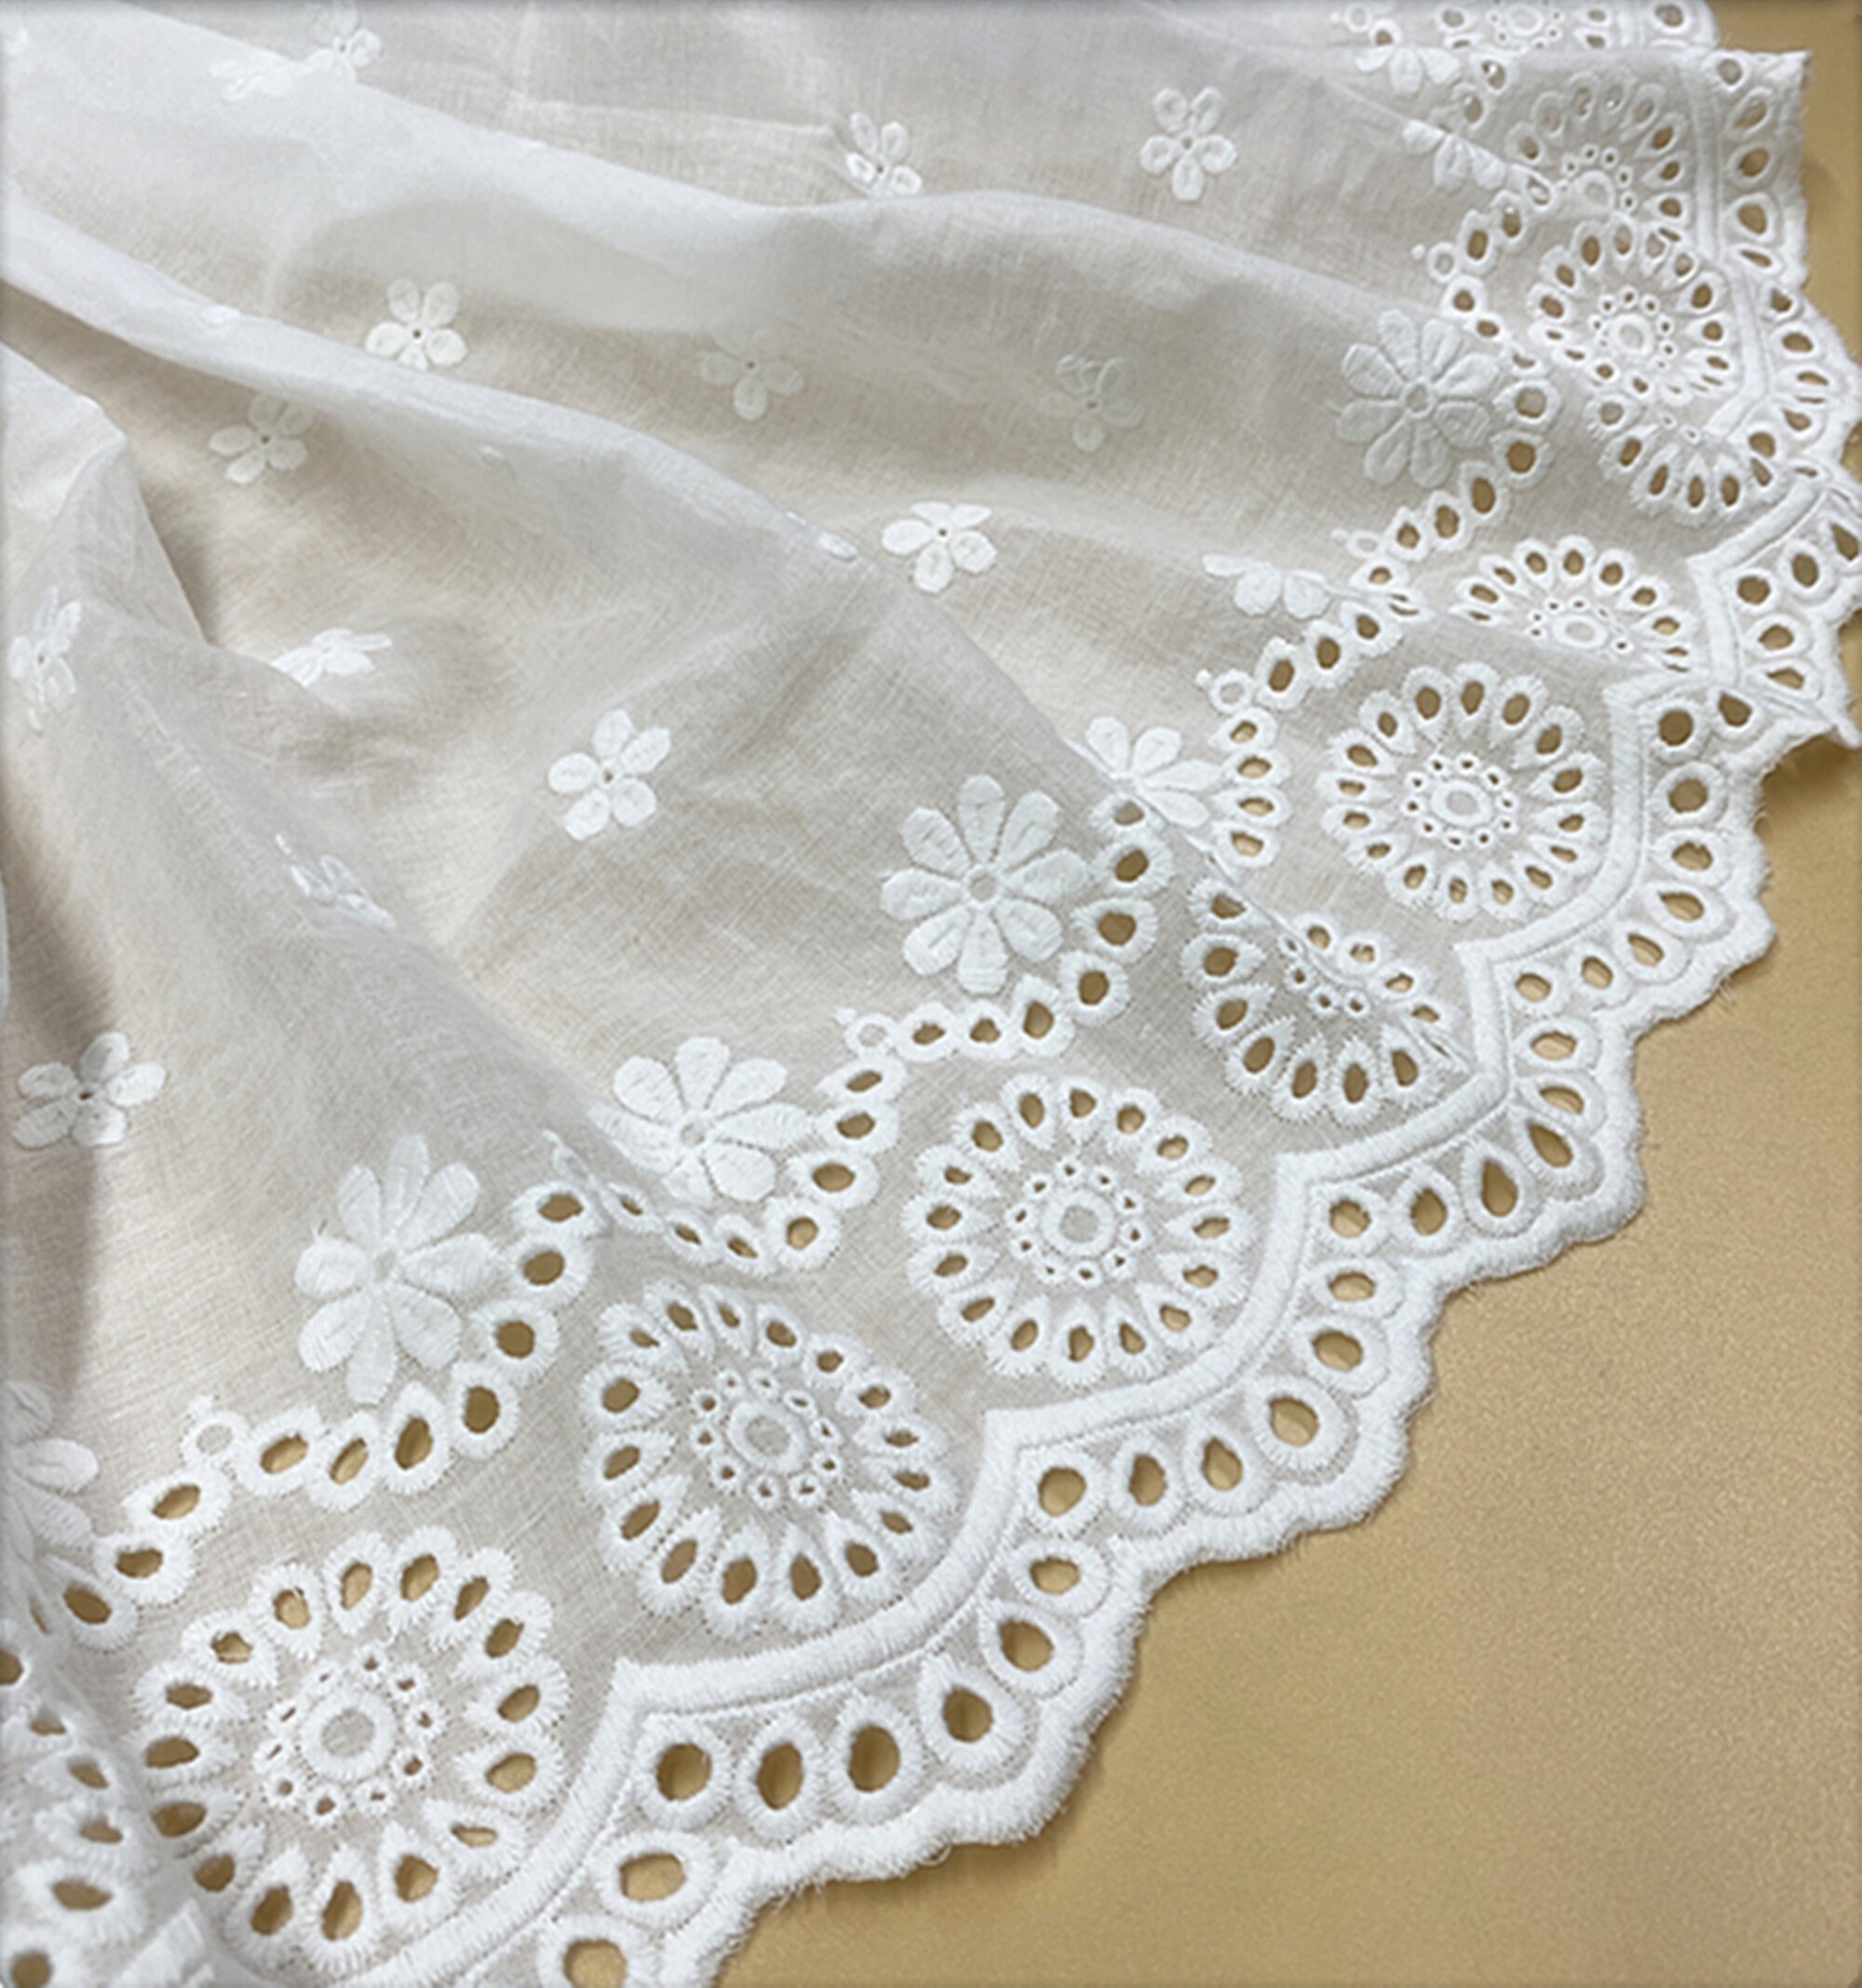 Off white cotton lace fabric cotton fabric with eyelet | Etsy